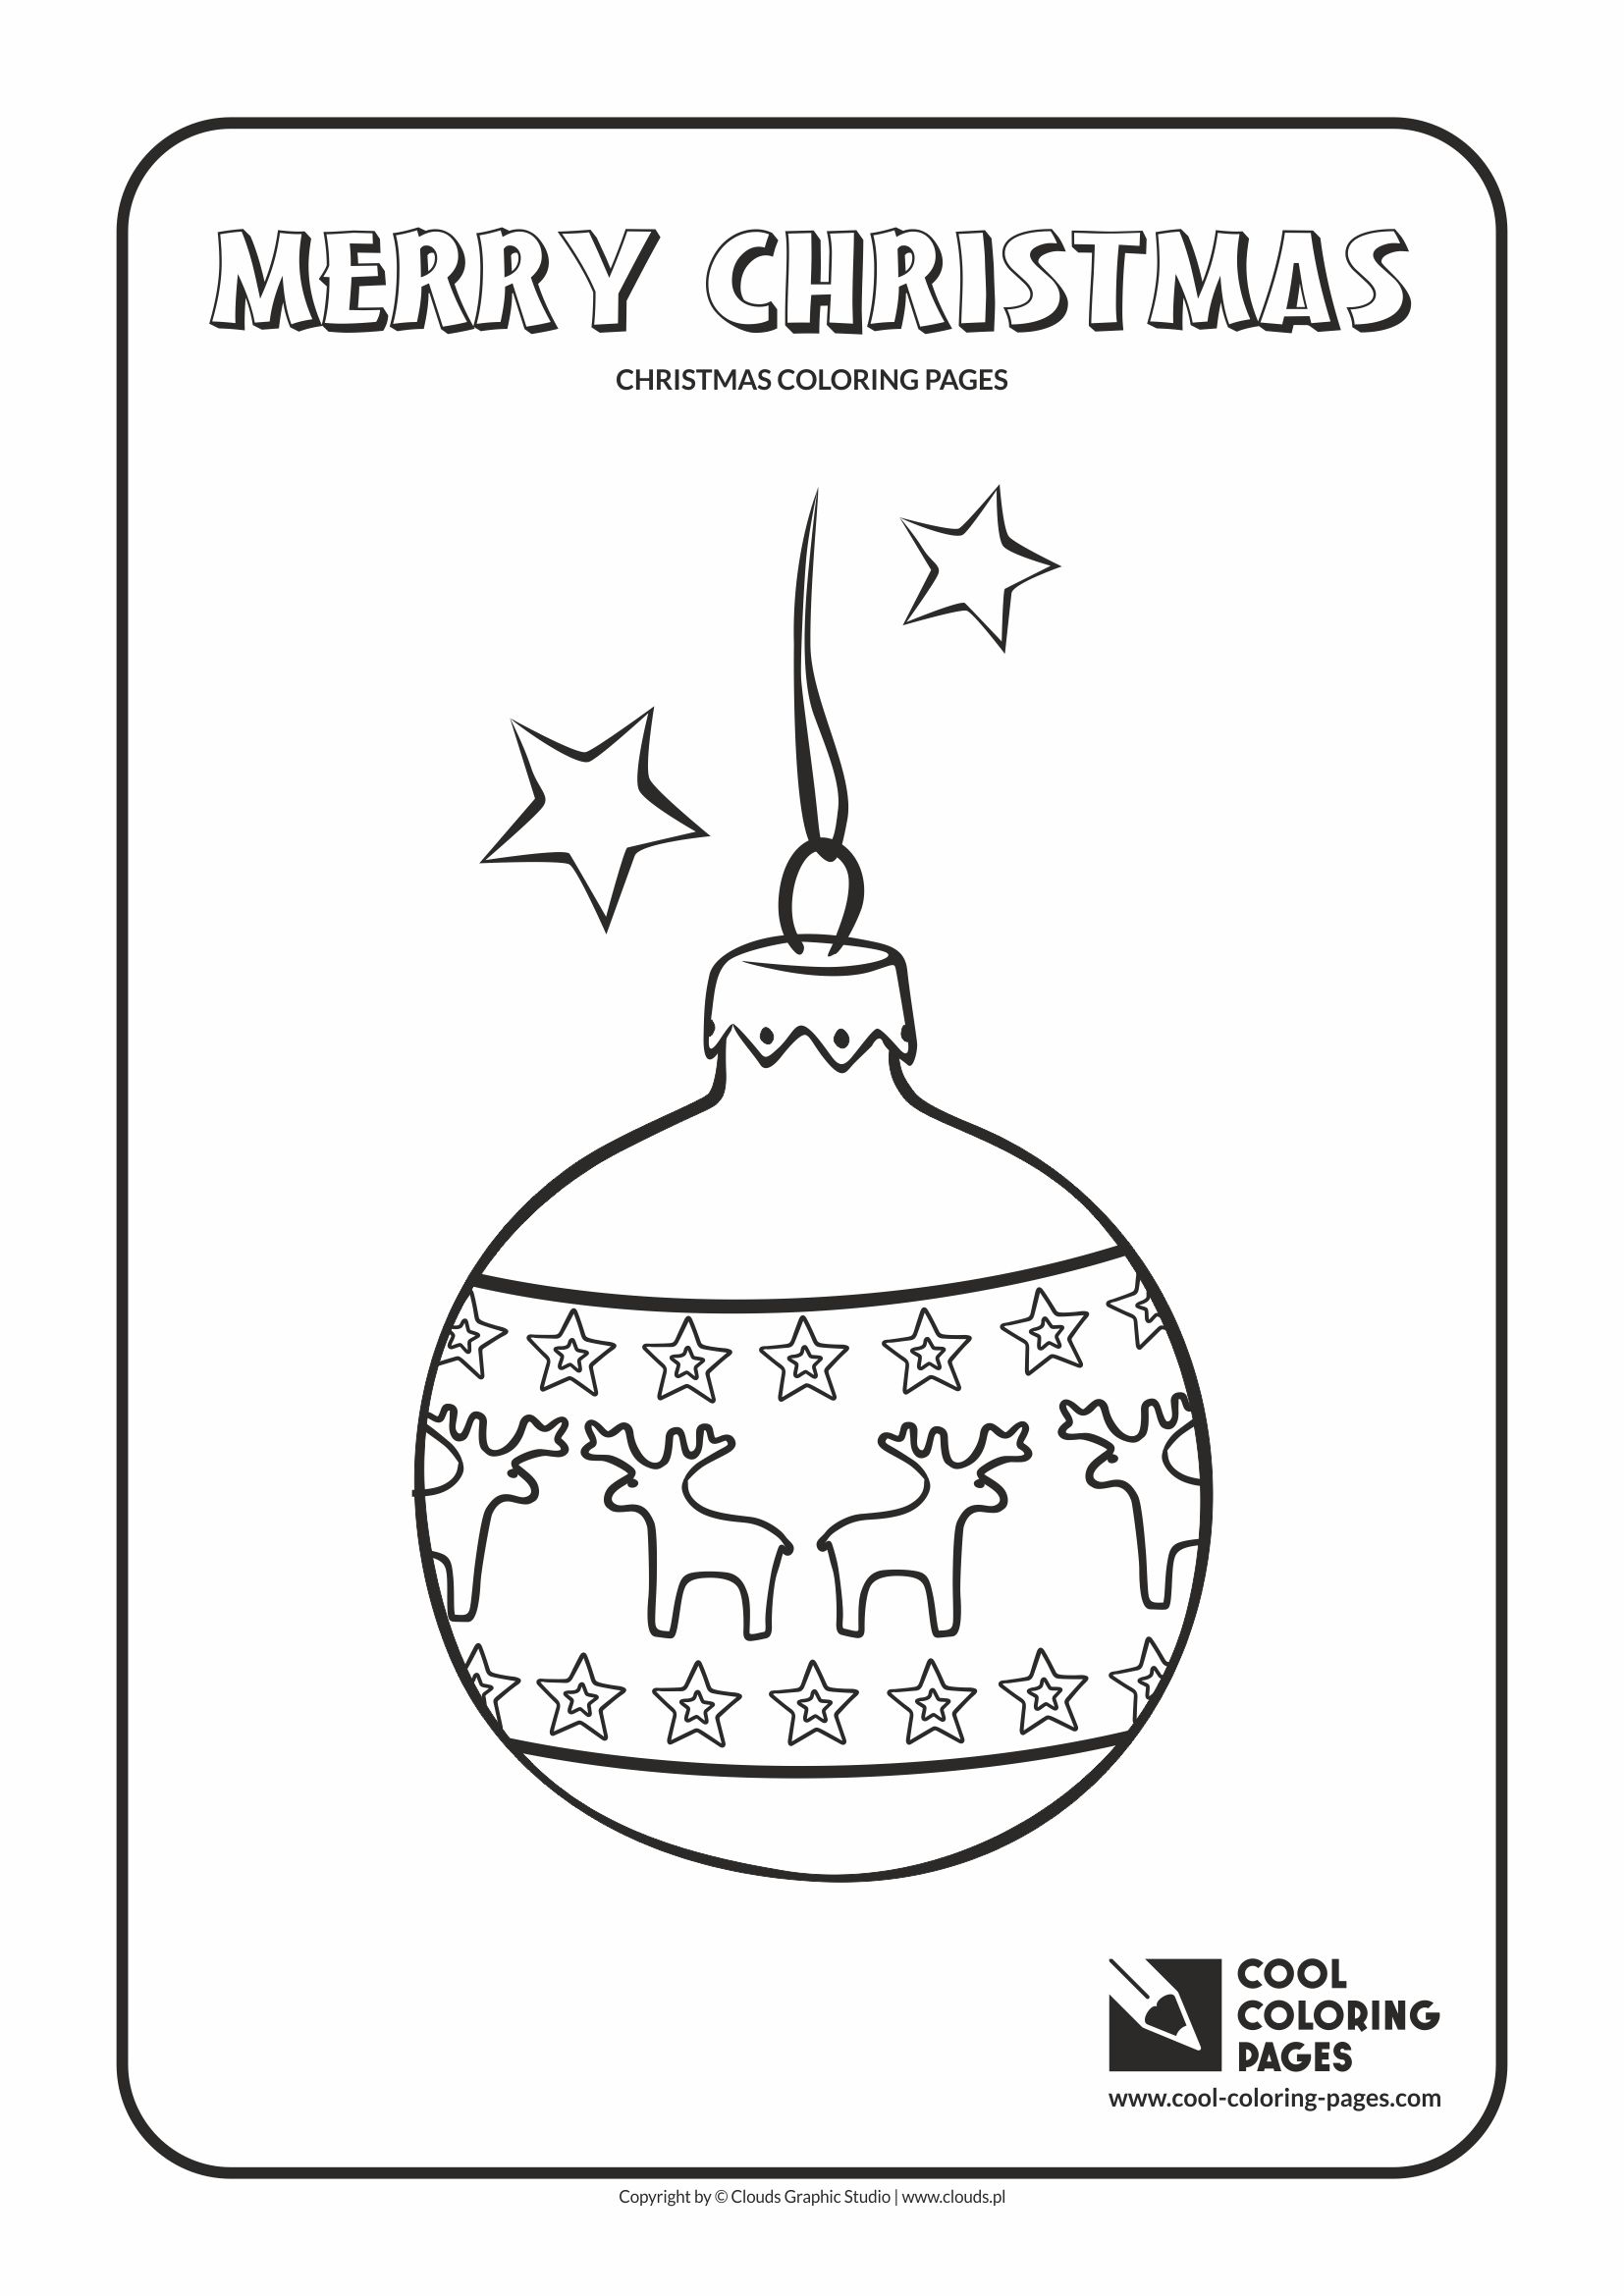 Cool Coloring Pages - Holidays / Christmas glass ball no 2 / Coloring page with Christmas glass ball no 2